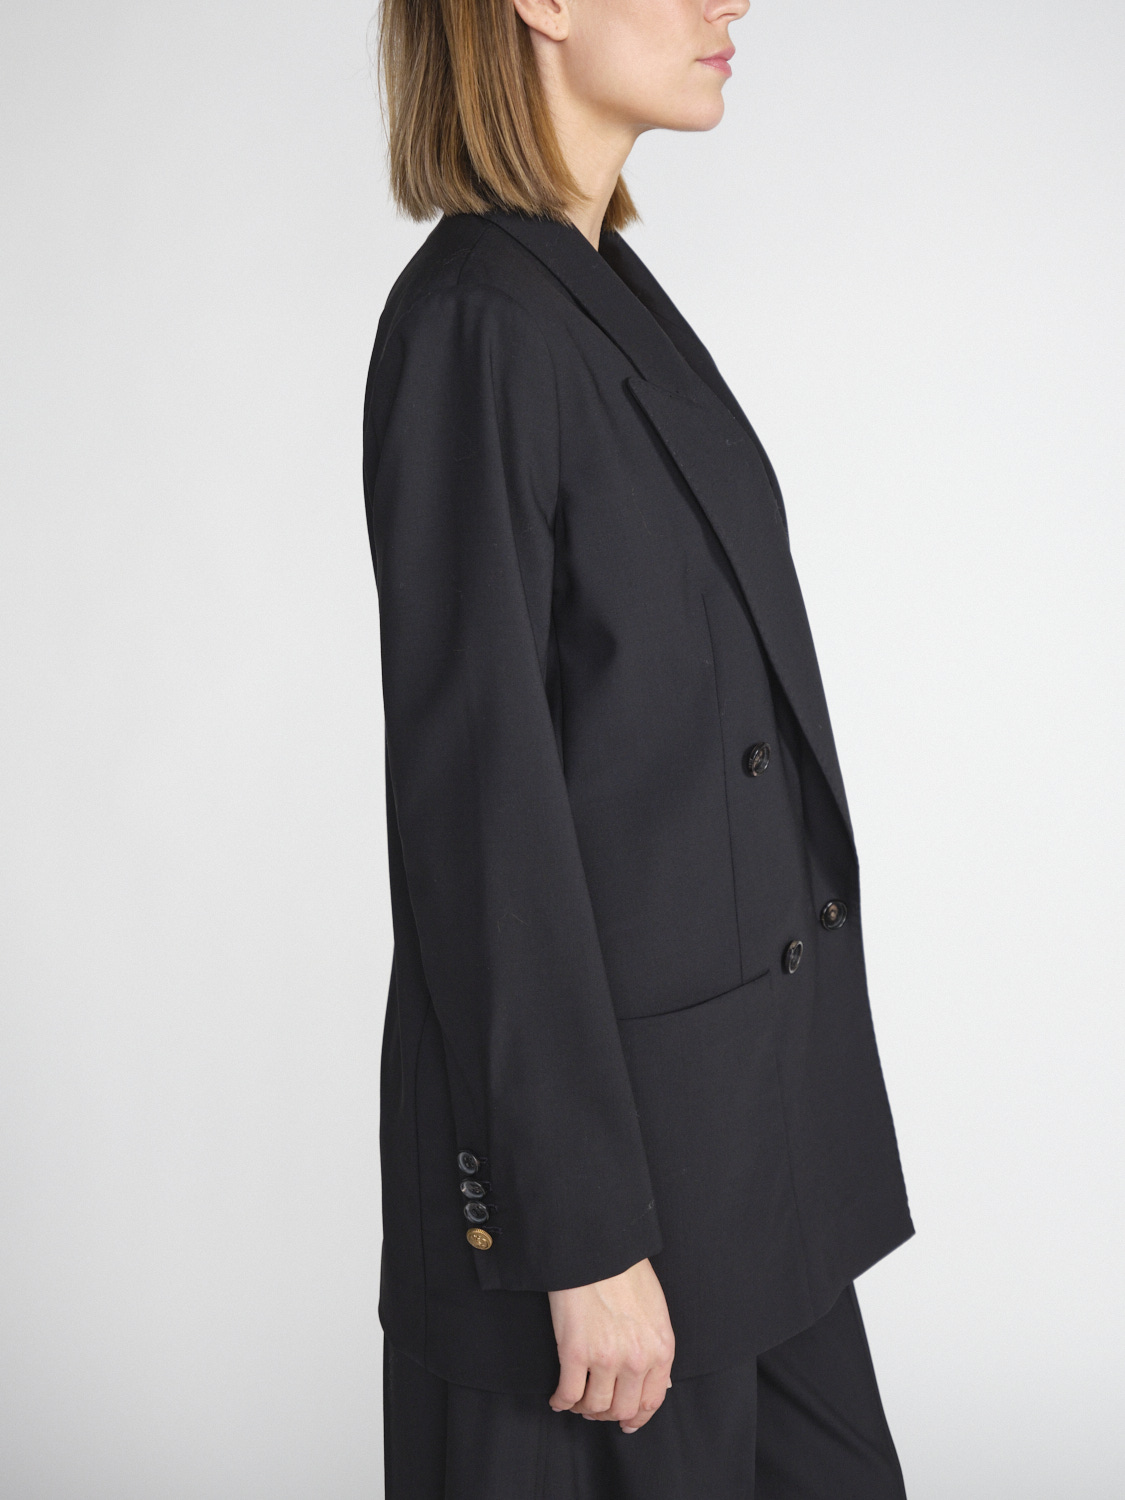 Lorena Antoniazzi Double-breasted blazer in virgin wool and stretch  black 34